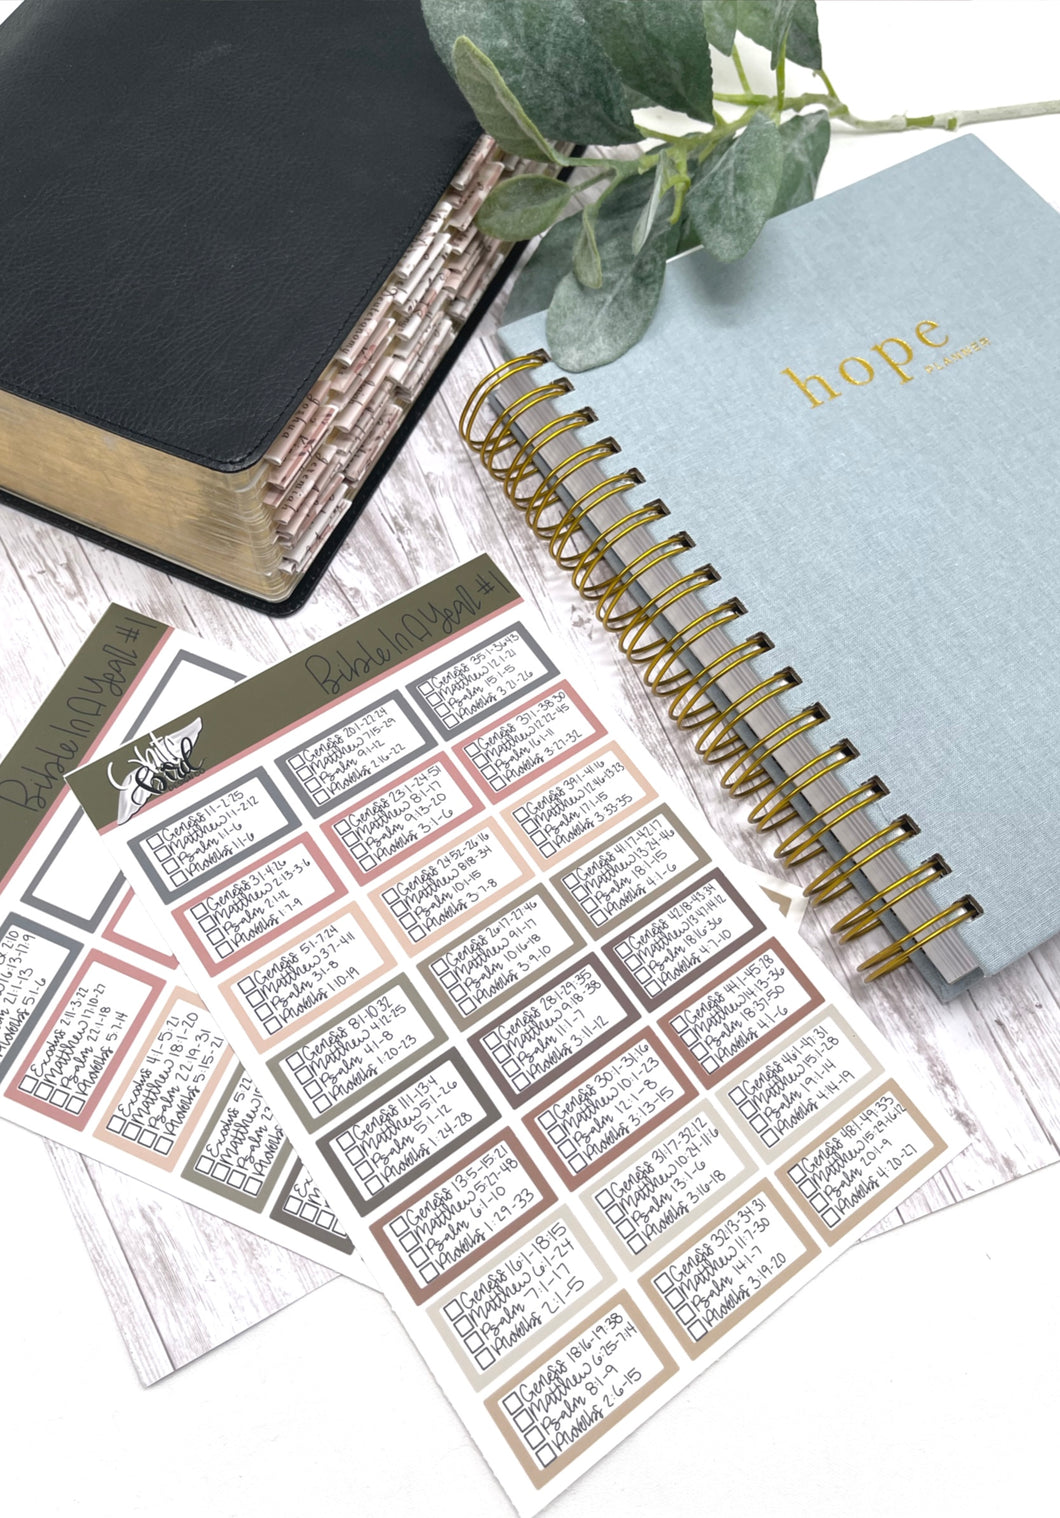 Bible Reading Plan Stickers| Daily Stickers|Christian Stickers| Bible Study Sticker| Devotion Sticker| Neutral Stickers